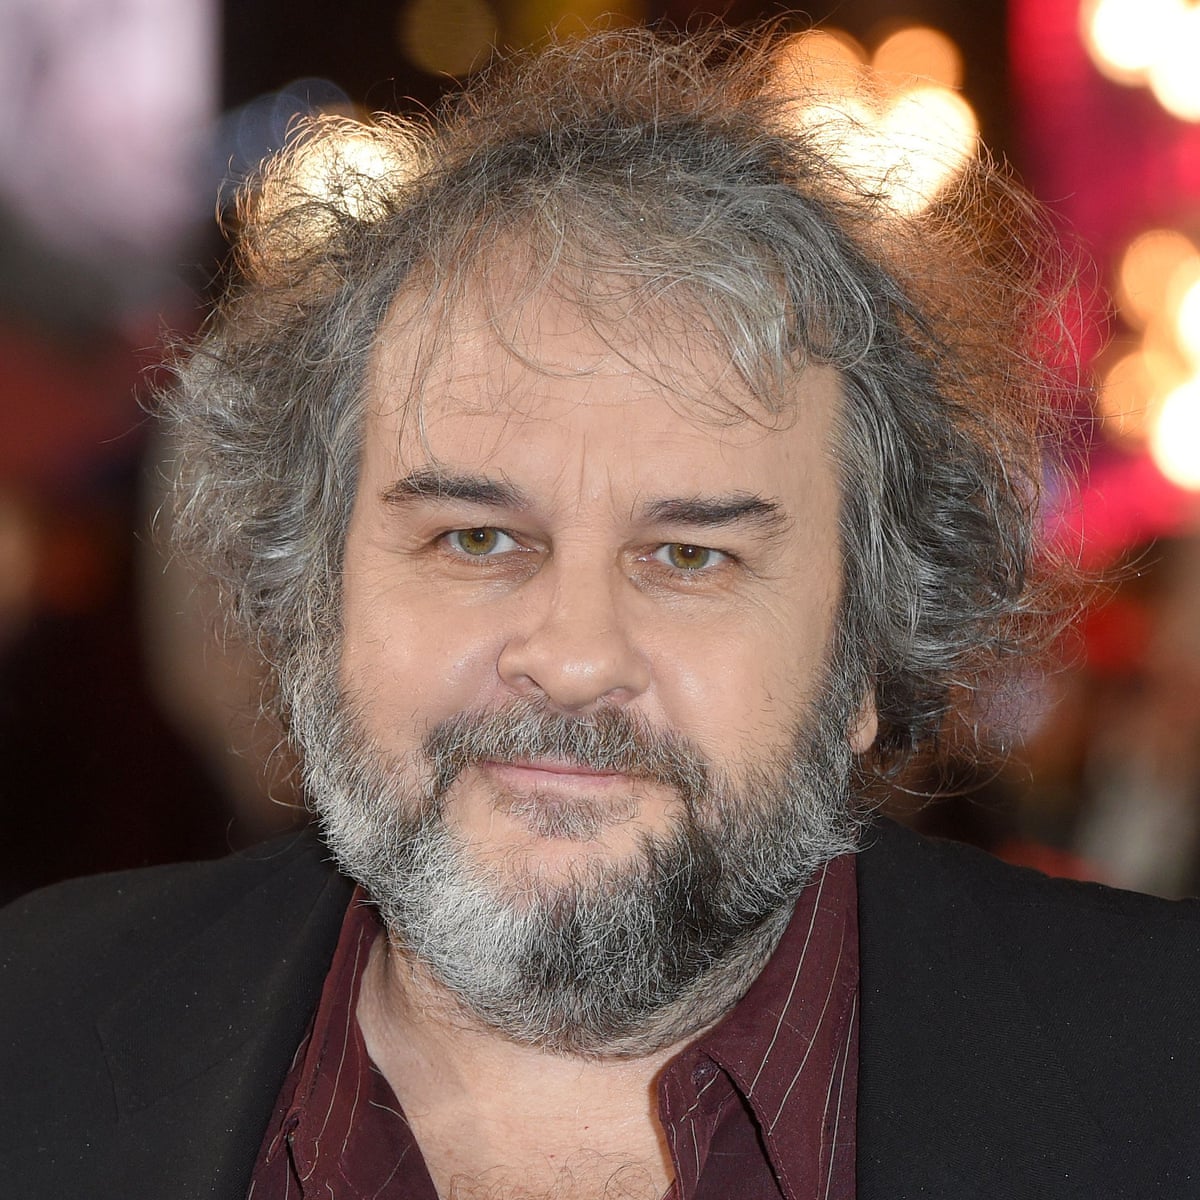 Lord of the bling: Peter Jackson tops Forbes highest paid entertainer list  | Peter Jackson | The Guardian